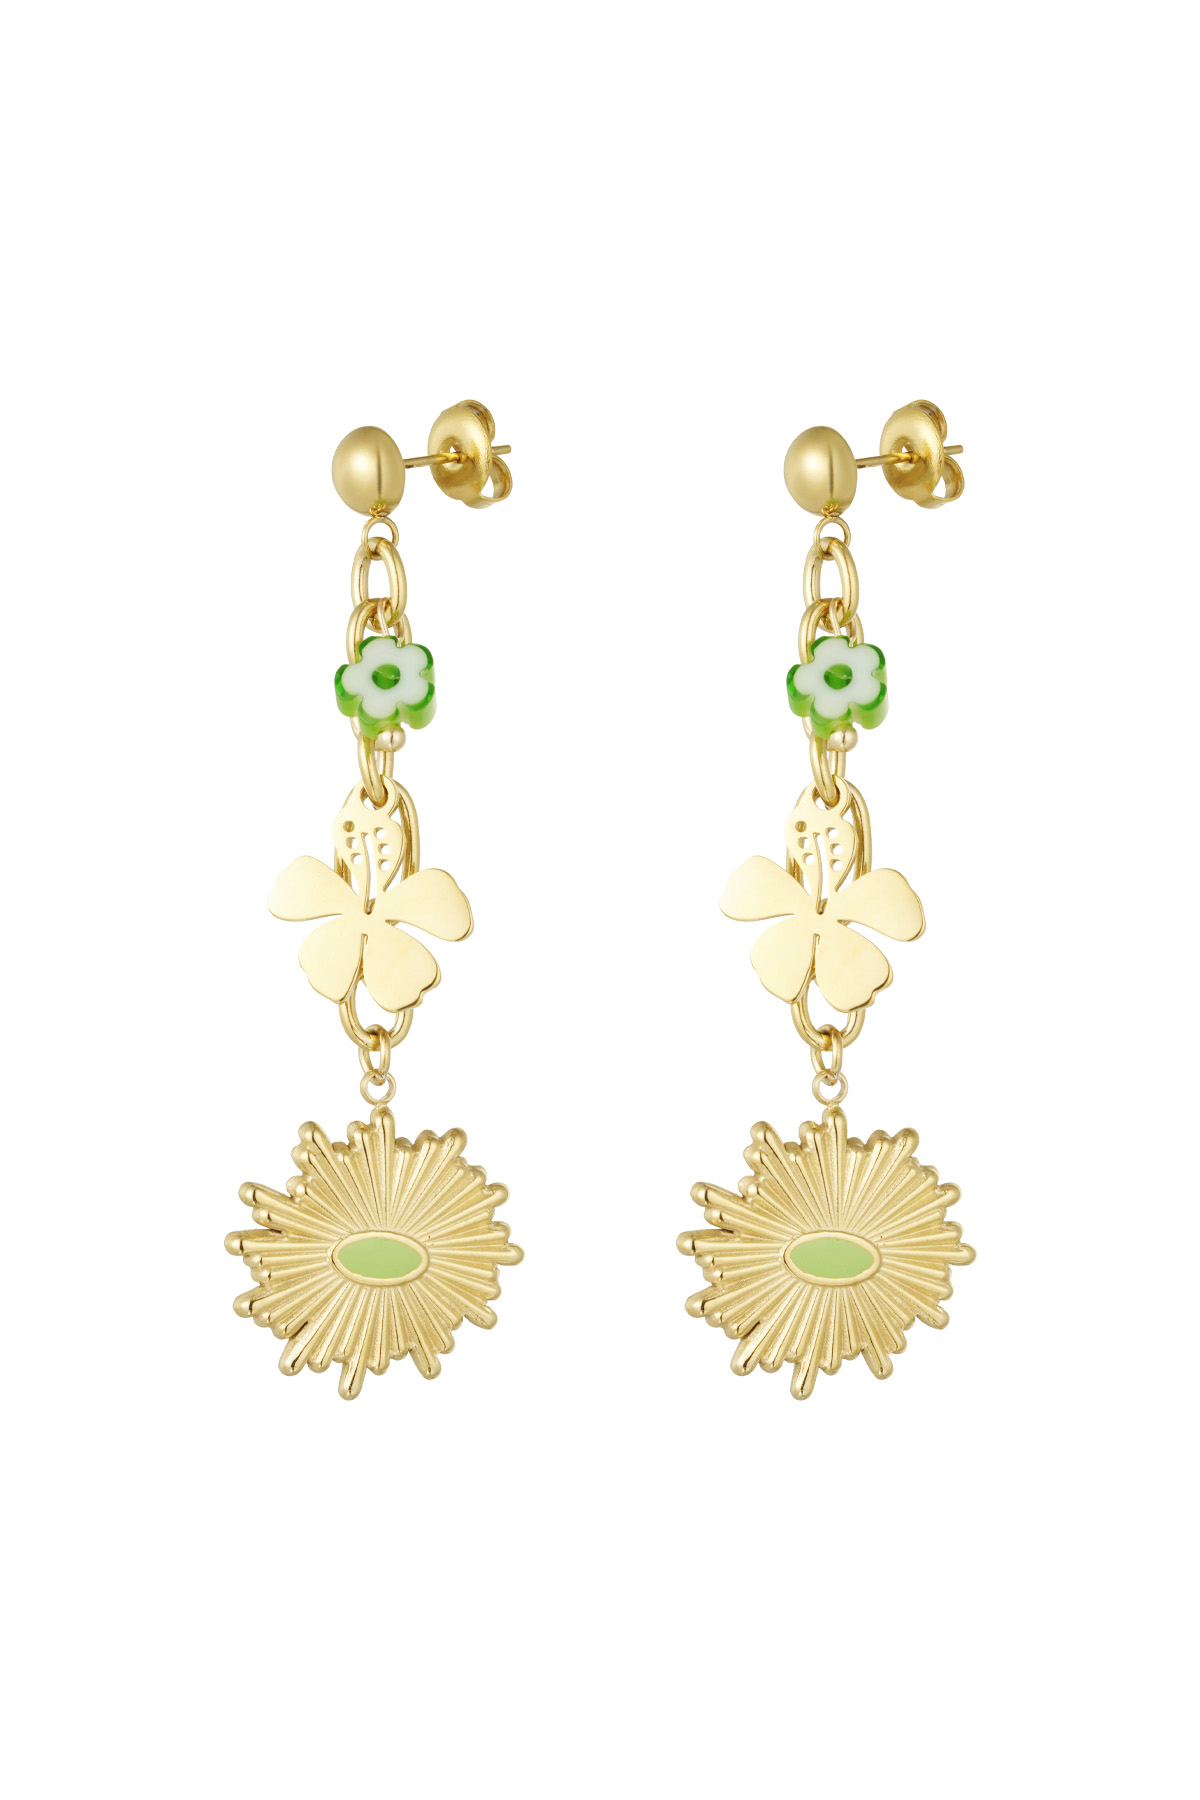 Earrings floral flawless - gold